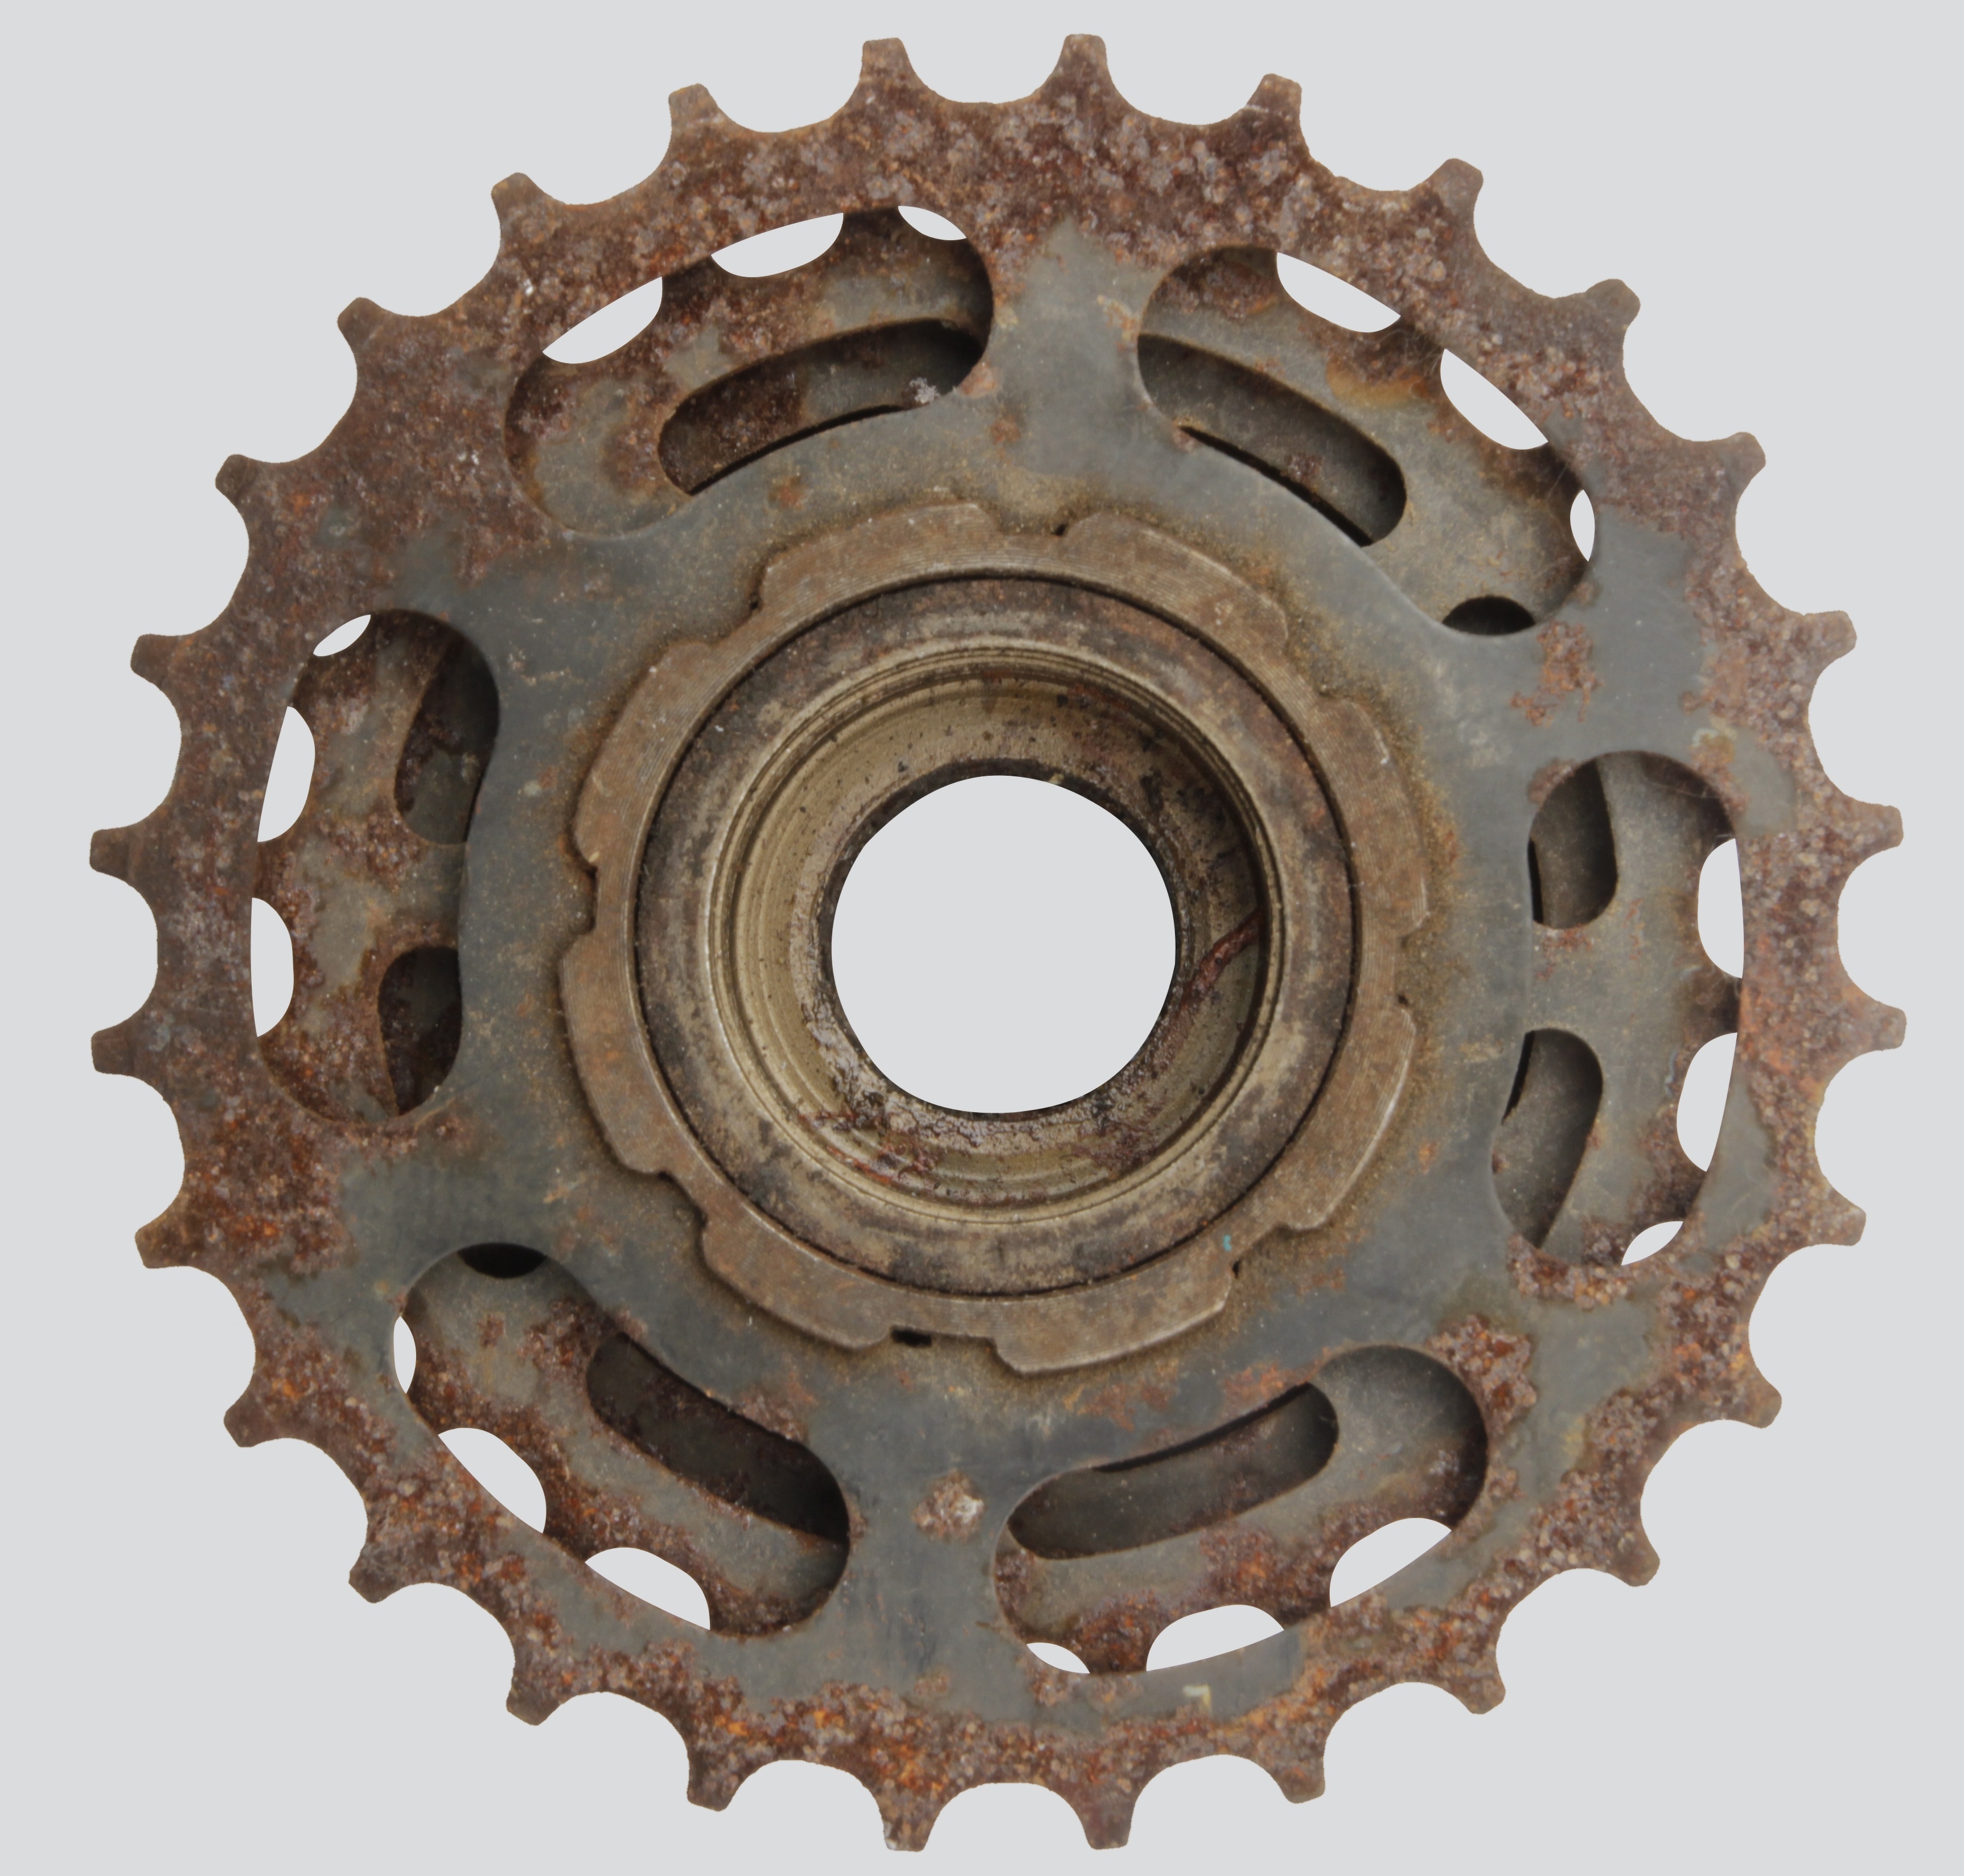 Rusty Gear Photoshop Contest (21878), Pictures Page 1 - Pxleyes.com